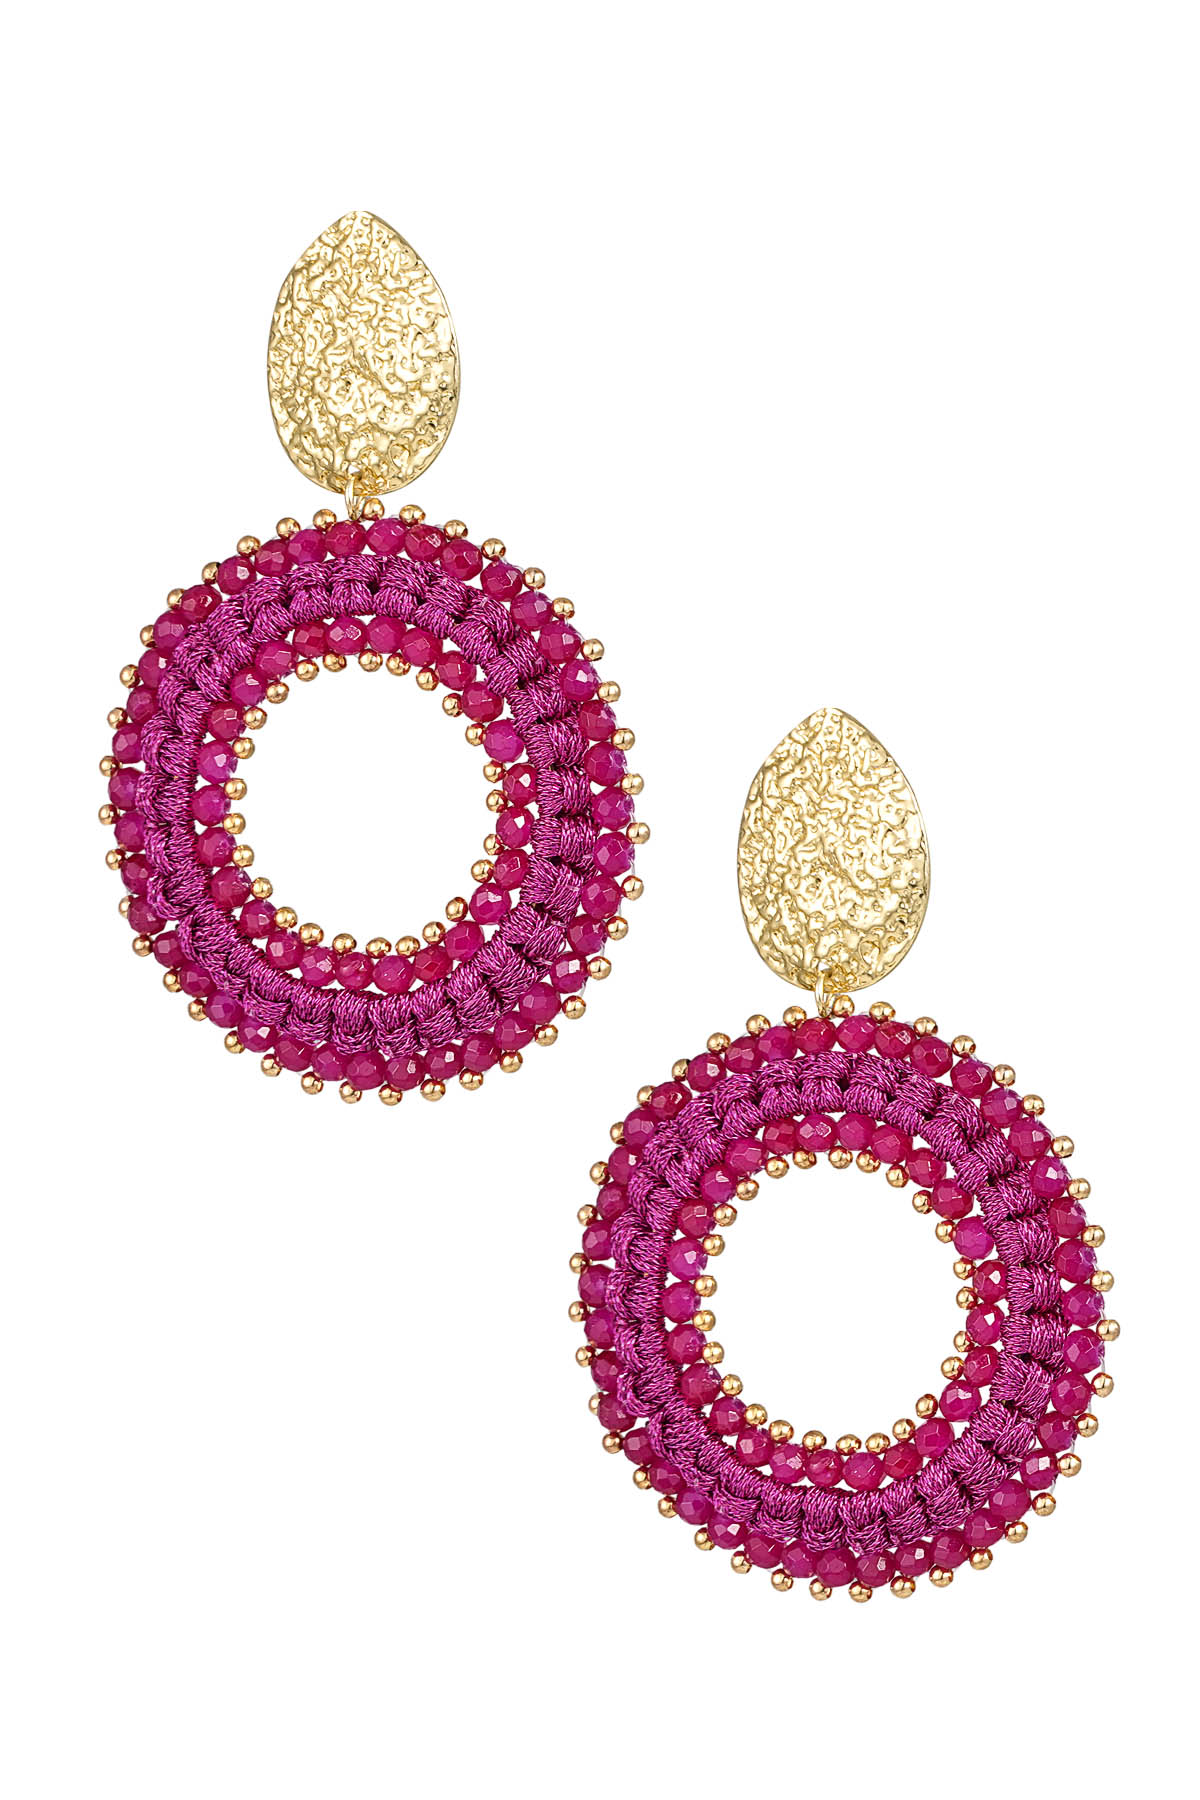 Round earrings with beads - gold/fuchsia 